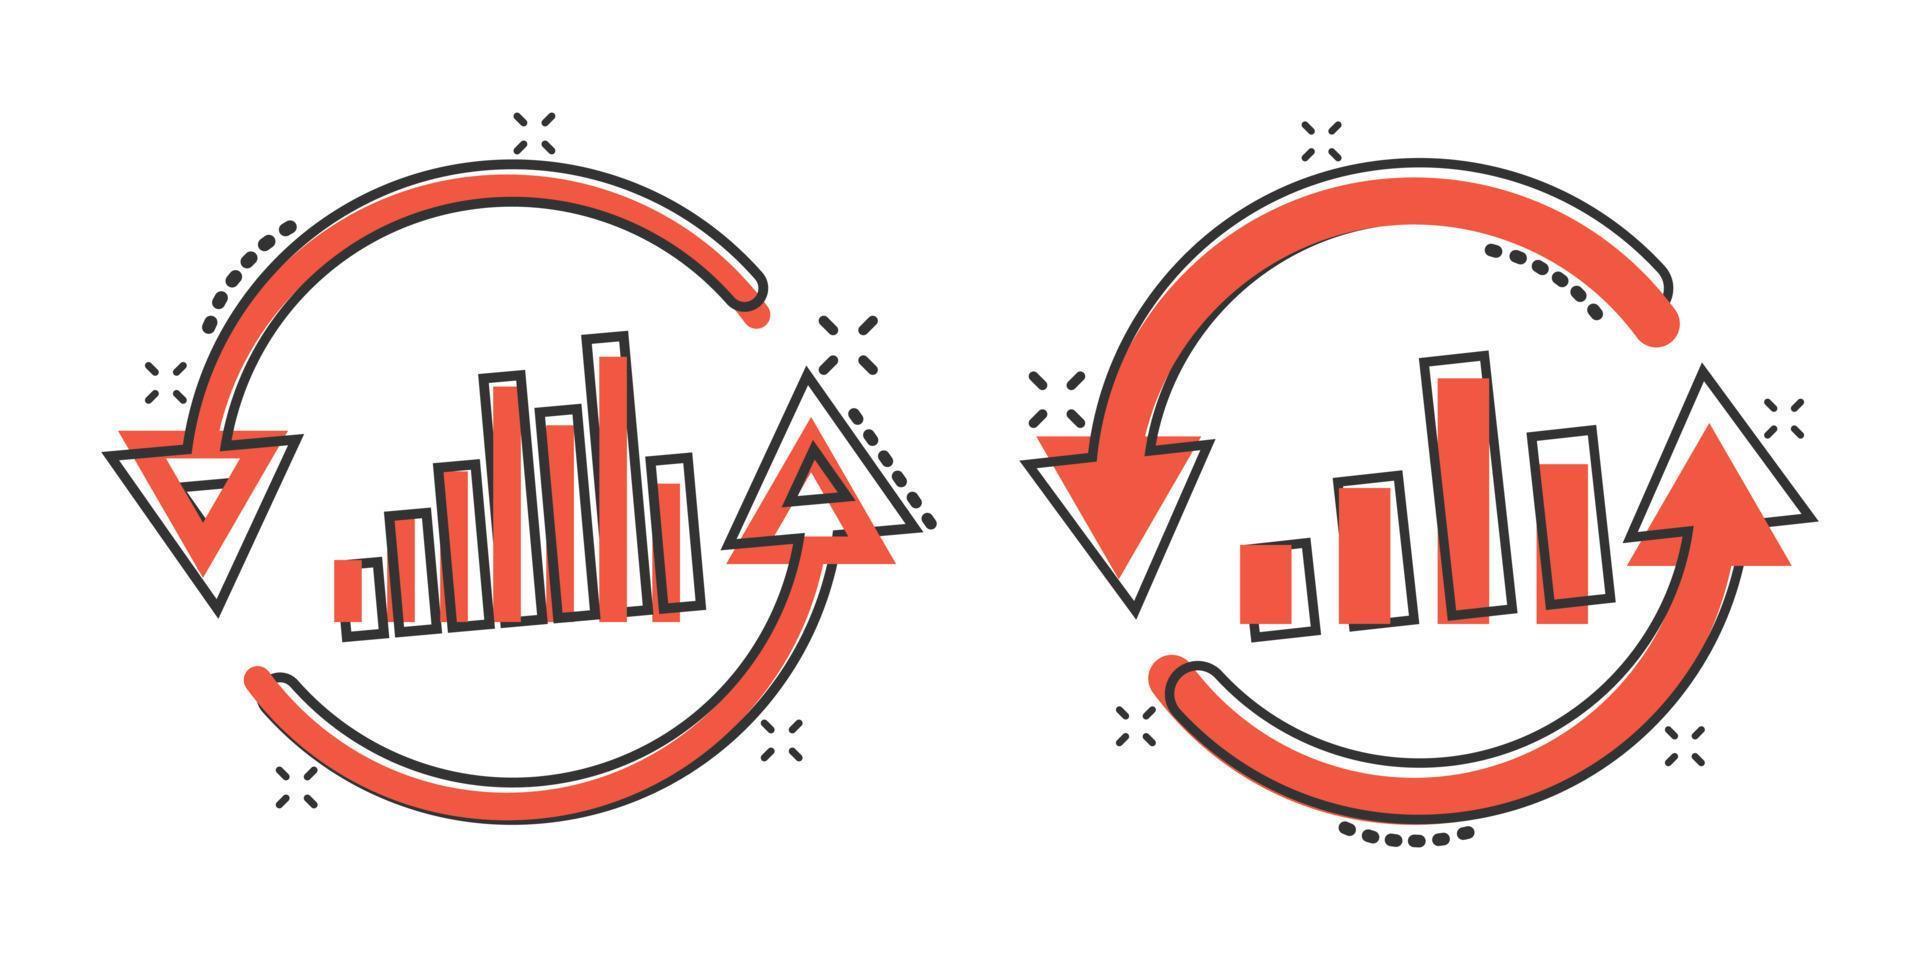 Growing bar graph icon in comic style. Increase arrow cartoon vector illustration on white isolated background. Infographic progress splash effect business concept.